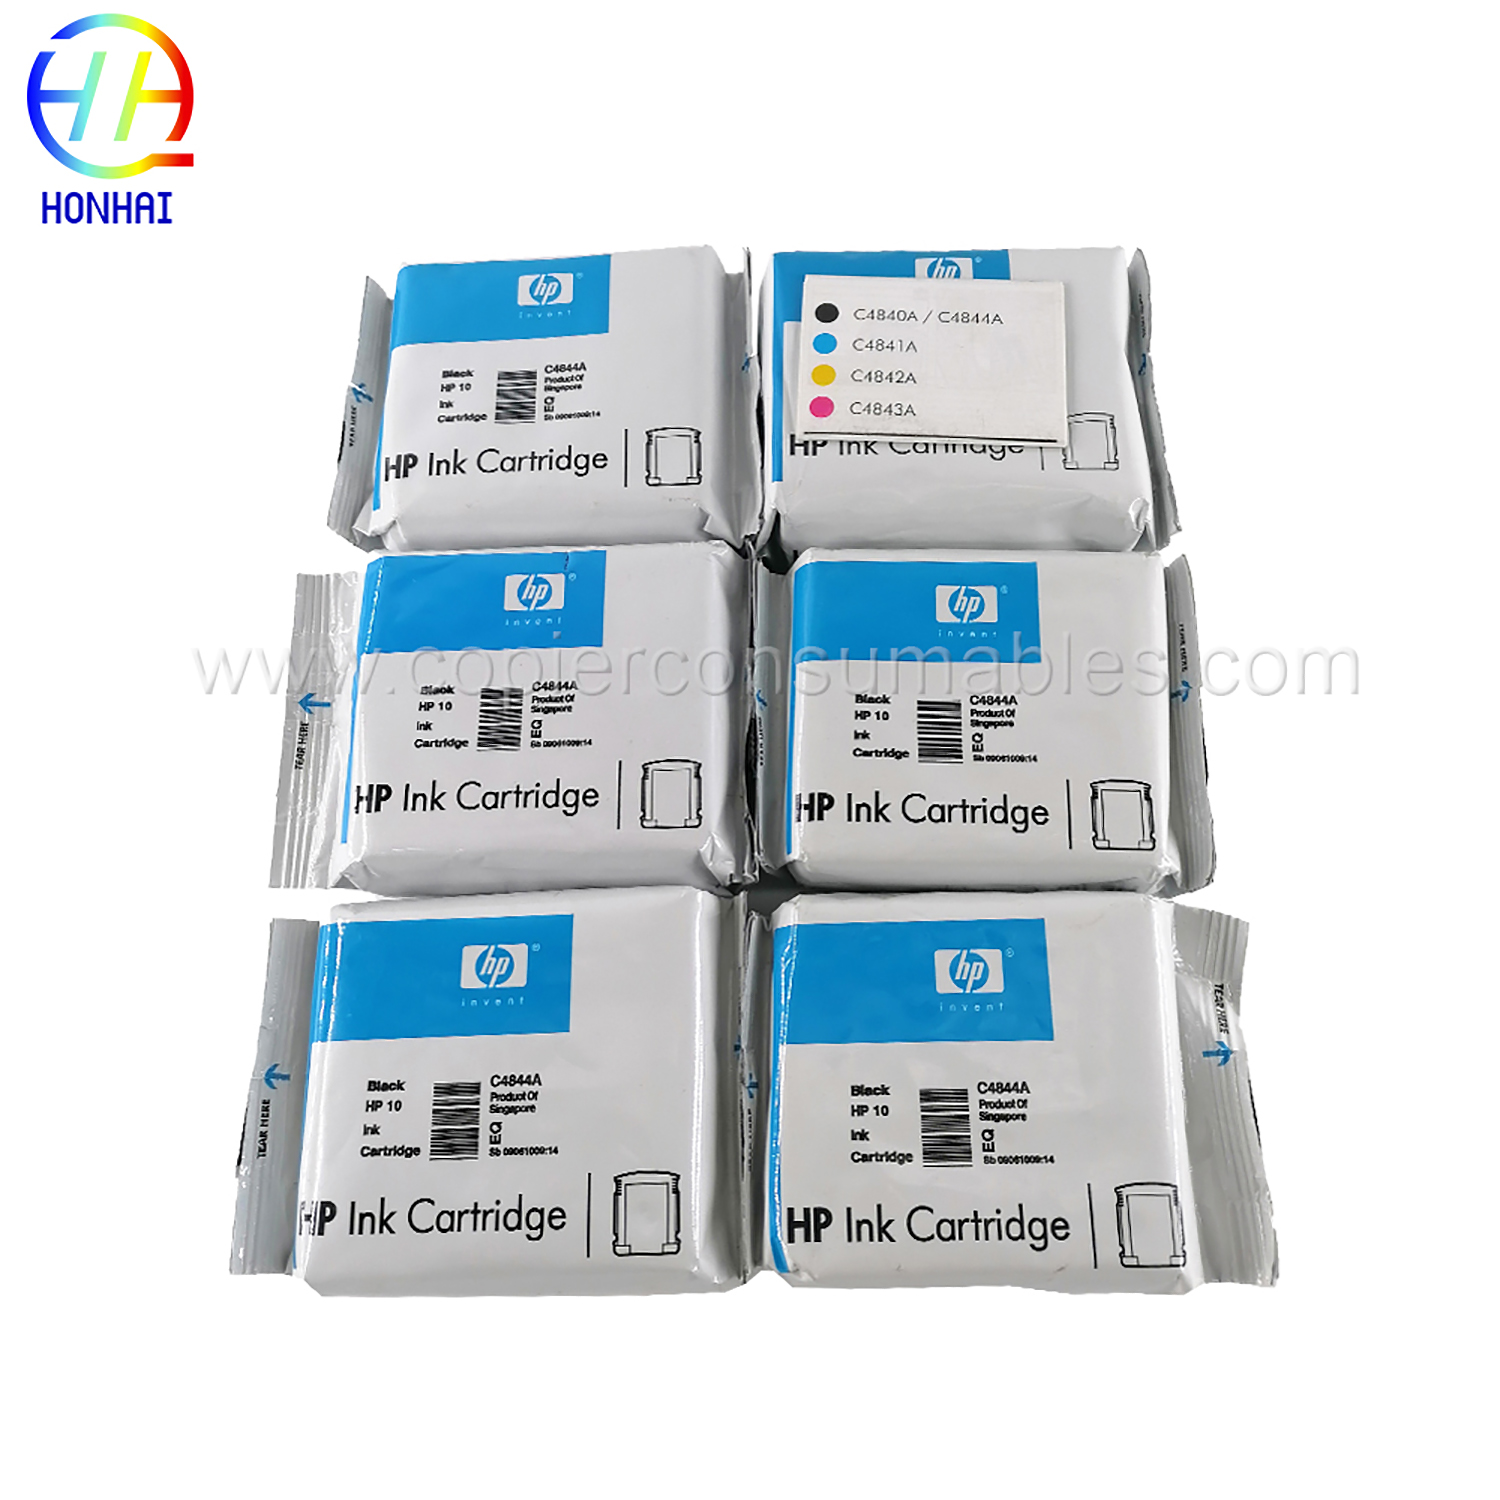 Ink Cartridge Black for HP 10 C4844A